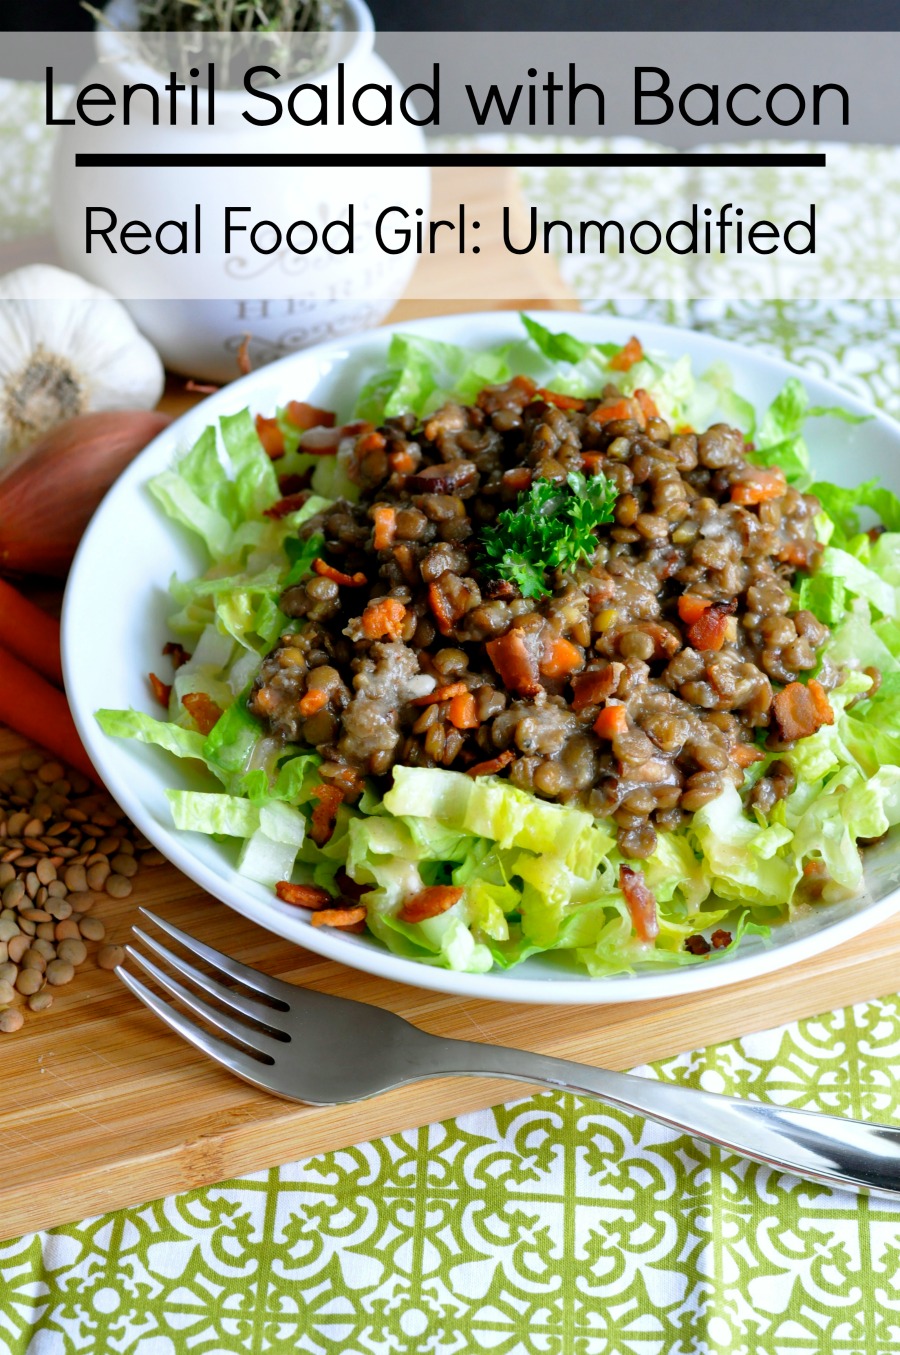 Lentil Salad with Bacon| Real Food Girl: Unmodified